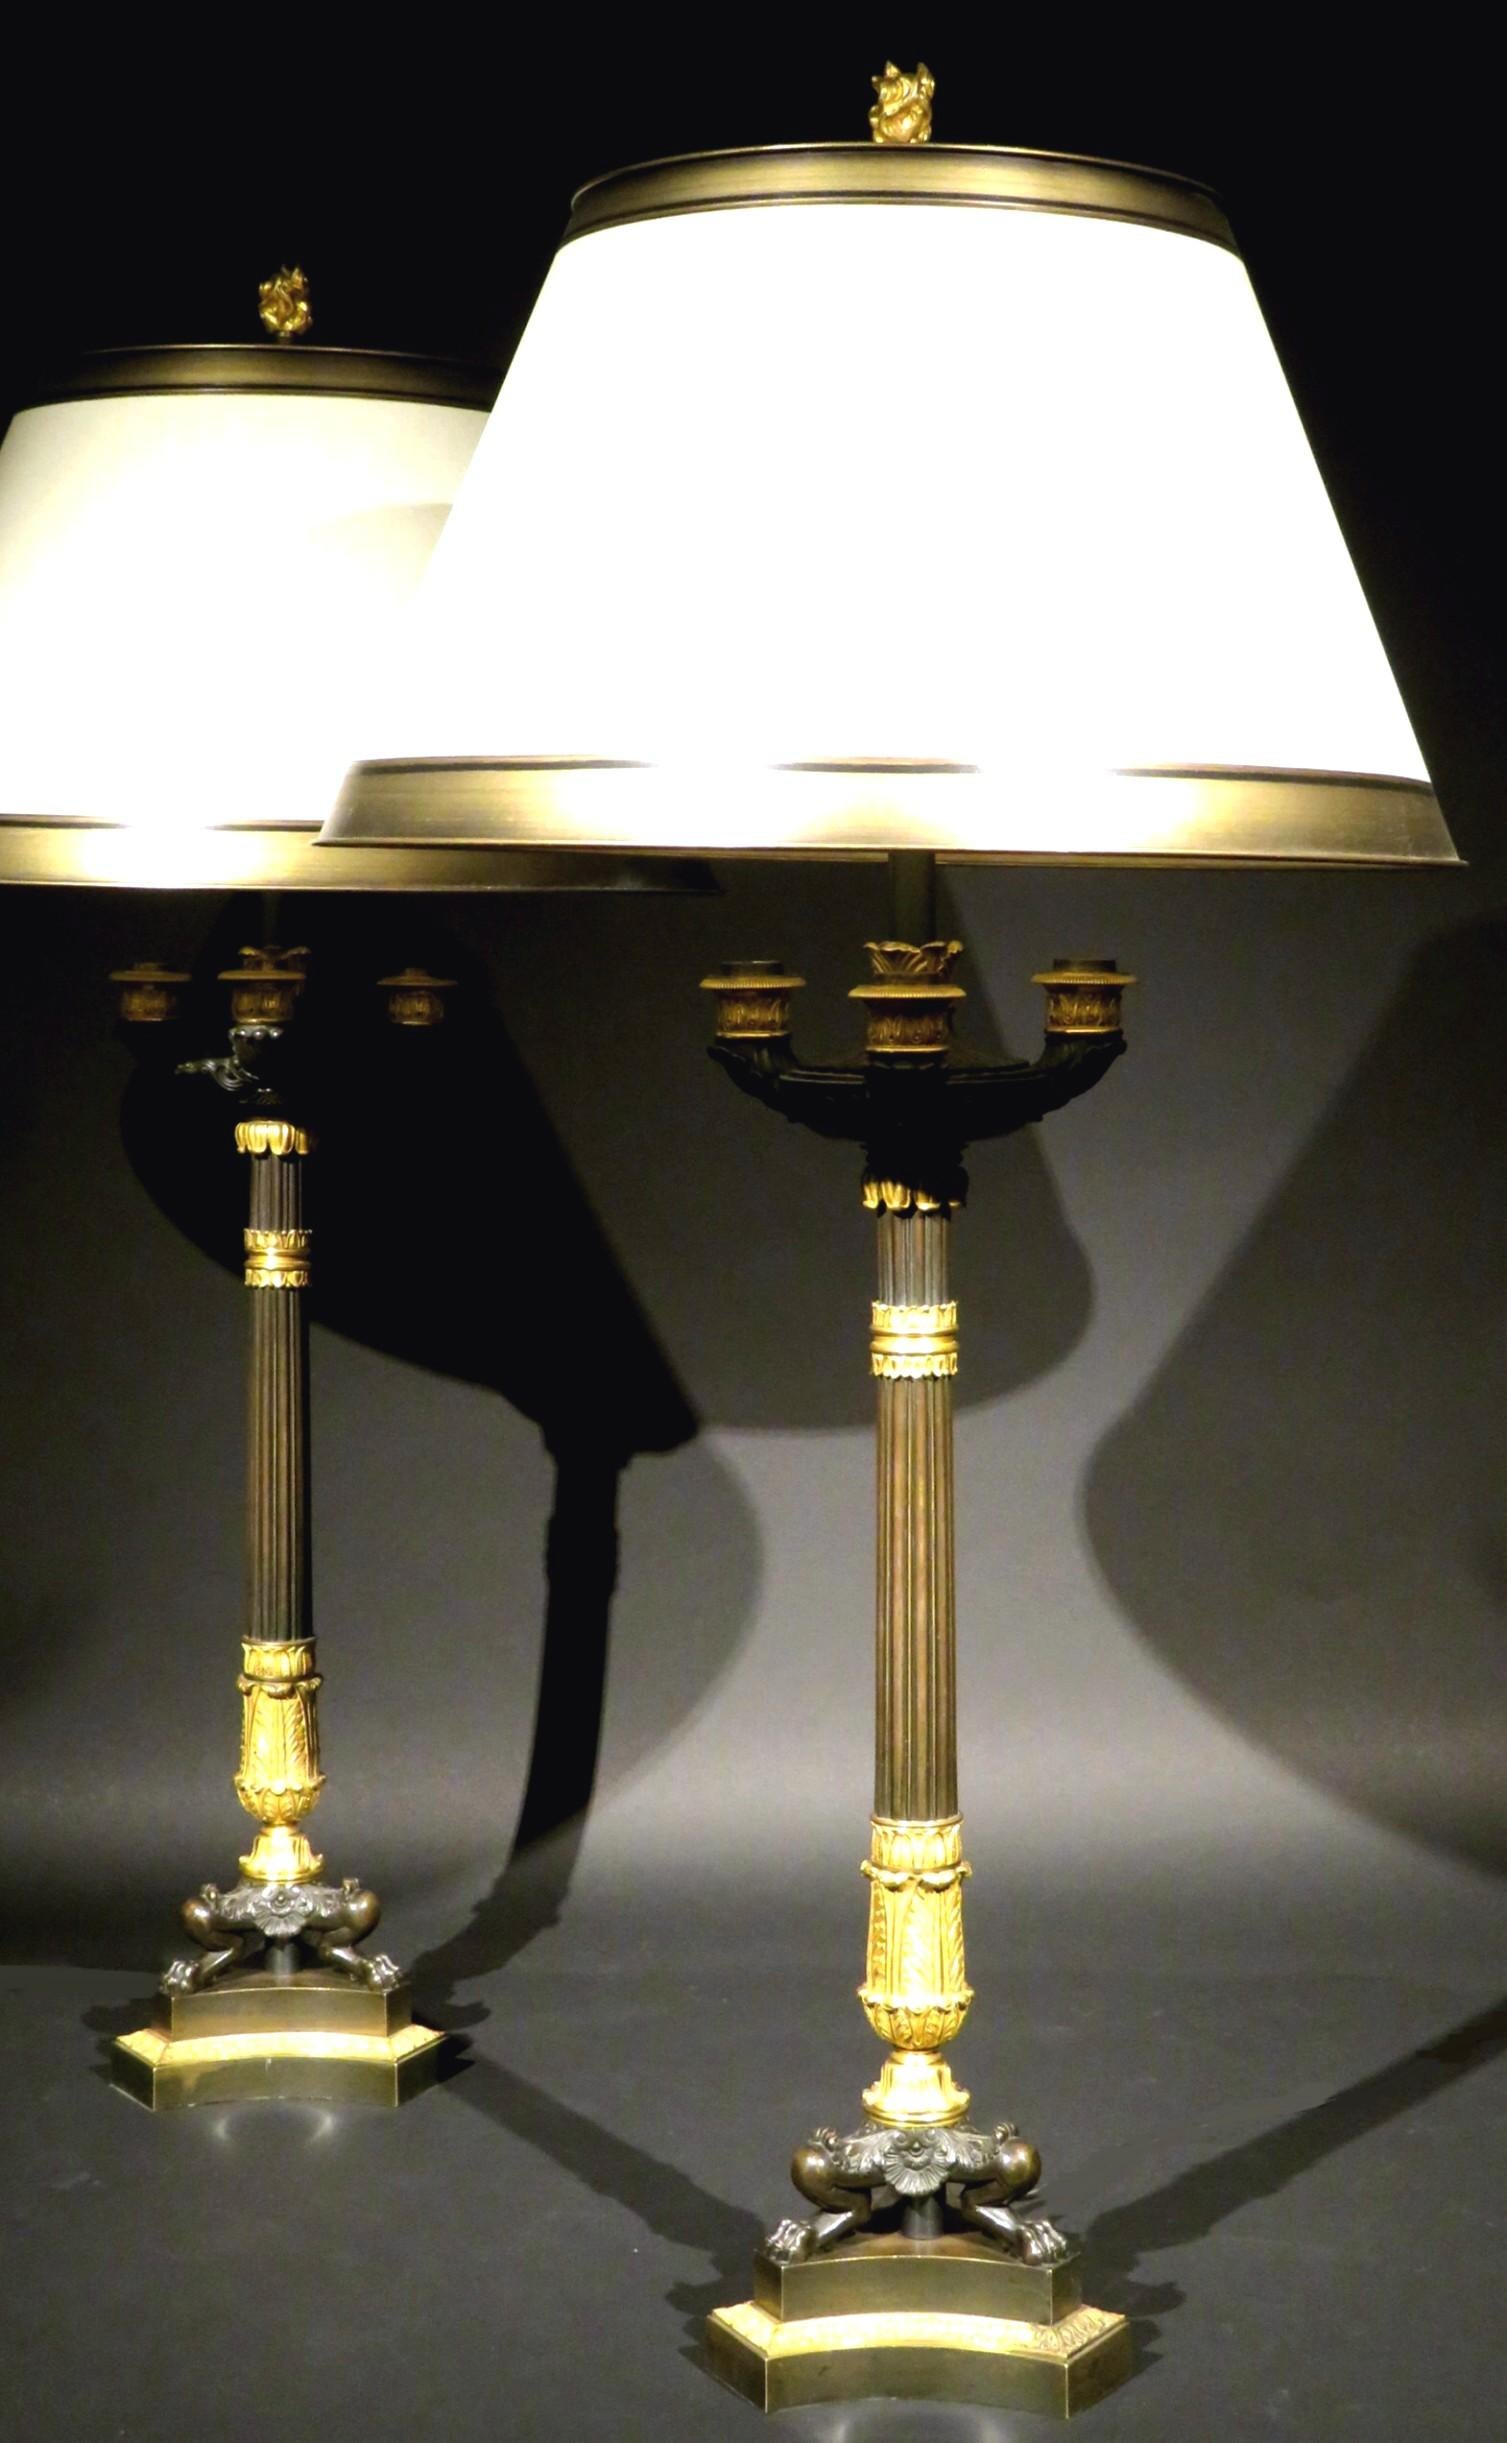 A very handsome pair of Empire Period parcel gilt bronze 3 light candelabra of exceptional quality & fine proportions, having been converted to table lamps decades ago. Both showing reeded columns decorated with finely chiselled & richly gilded